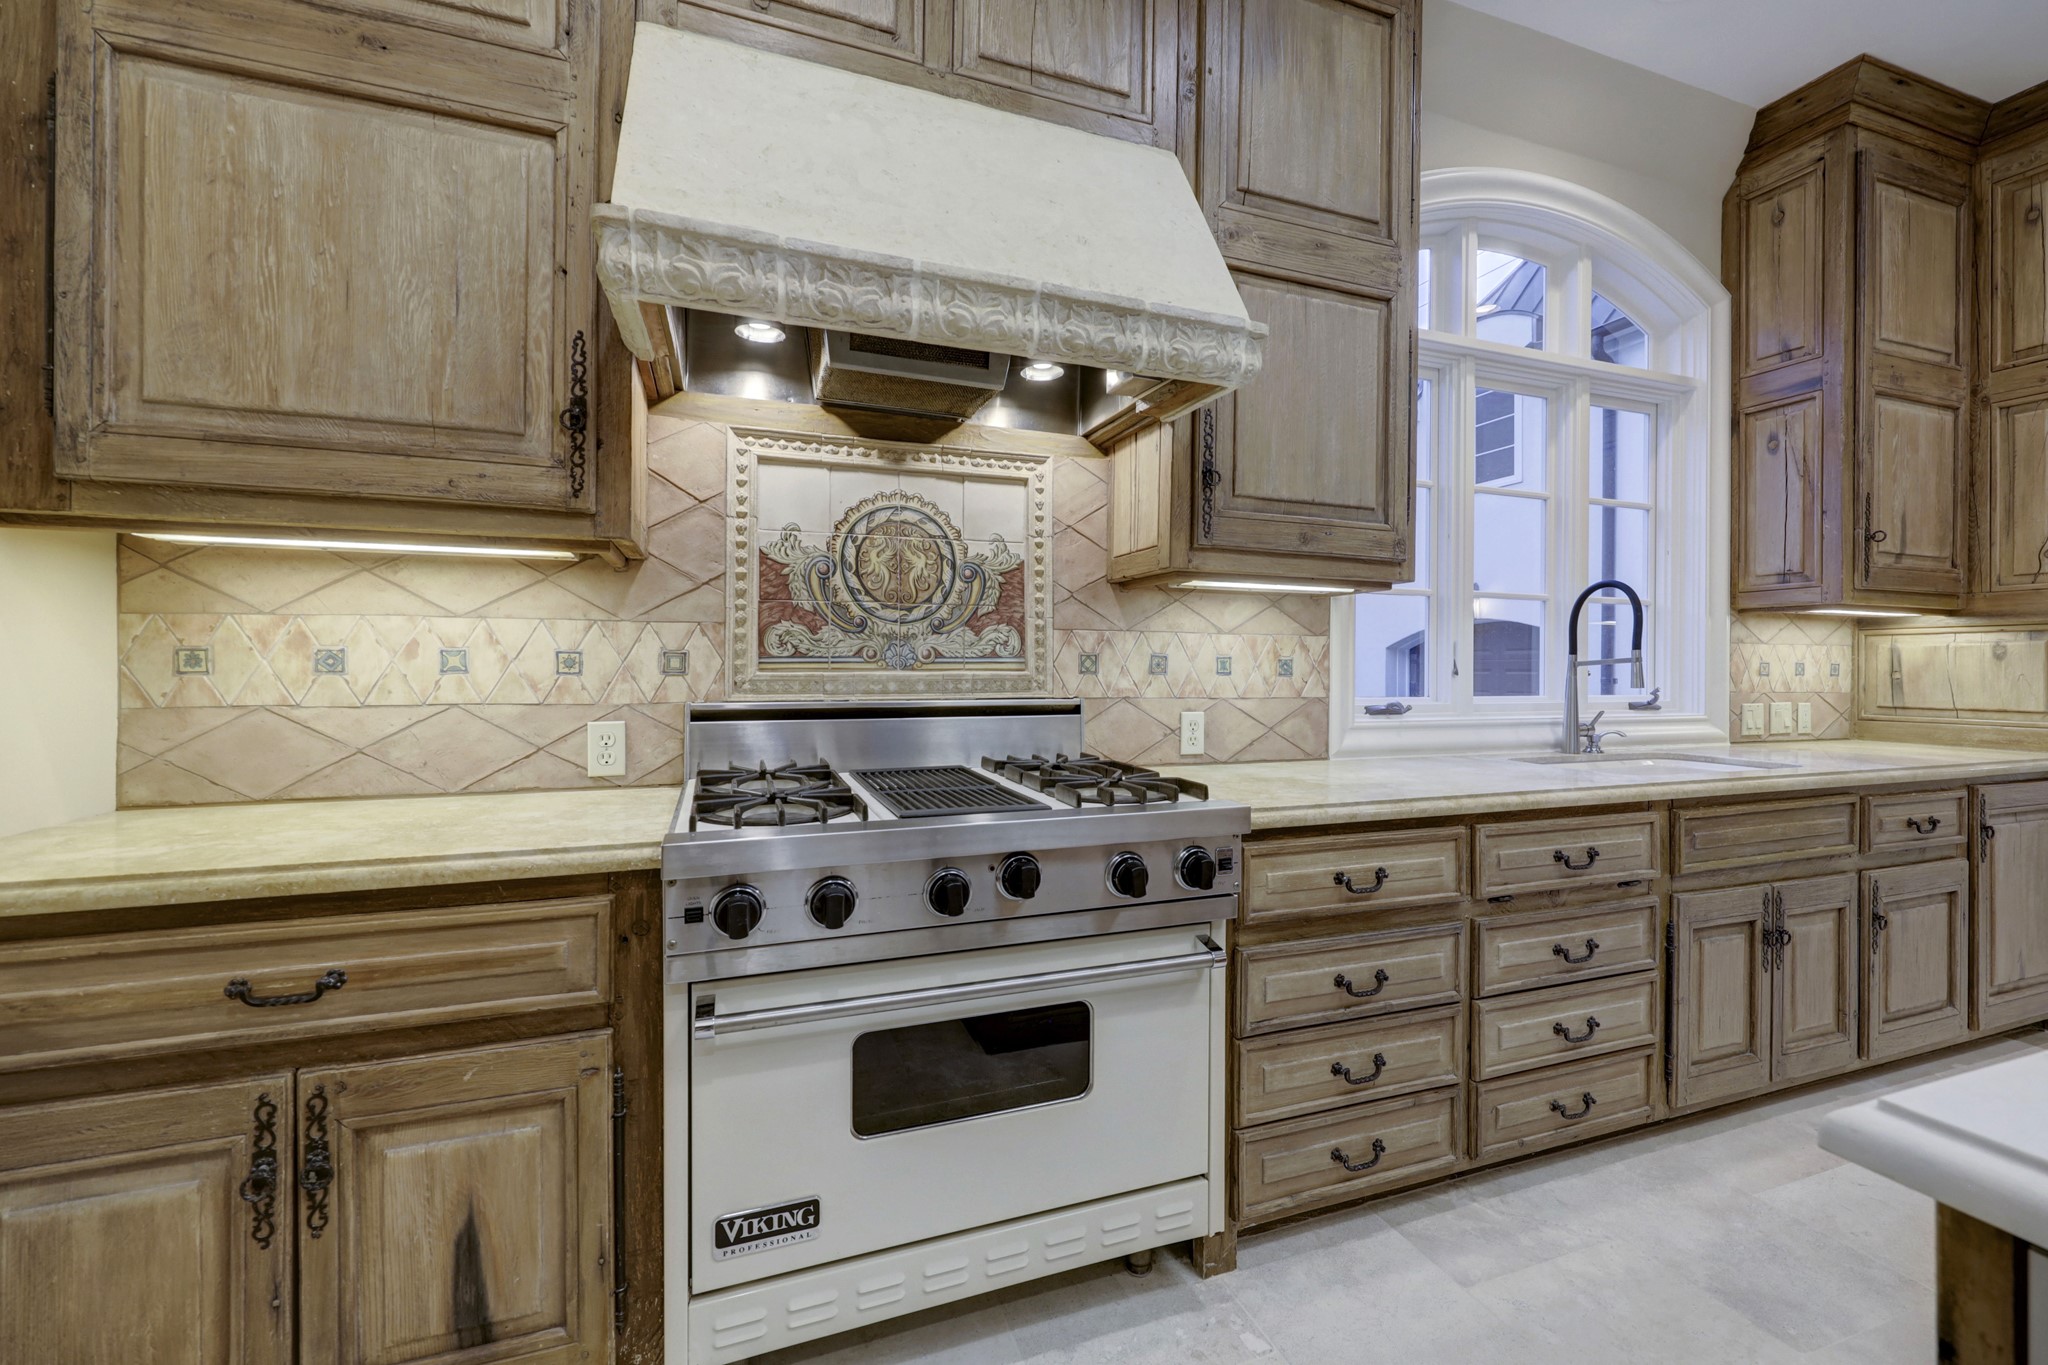 The VIKING Professional series range boasts 4-burners and grill with professional series vent hood.  Note the decorative backsplash and rustic French Chateau style cabinets.  What a beautiful place to create not only meals, but memories too!